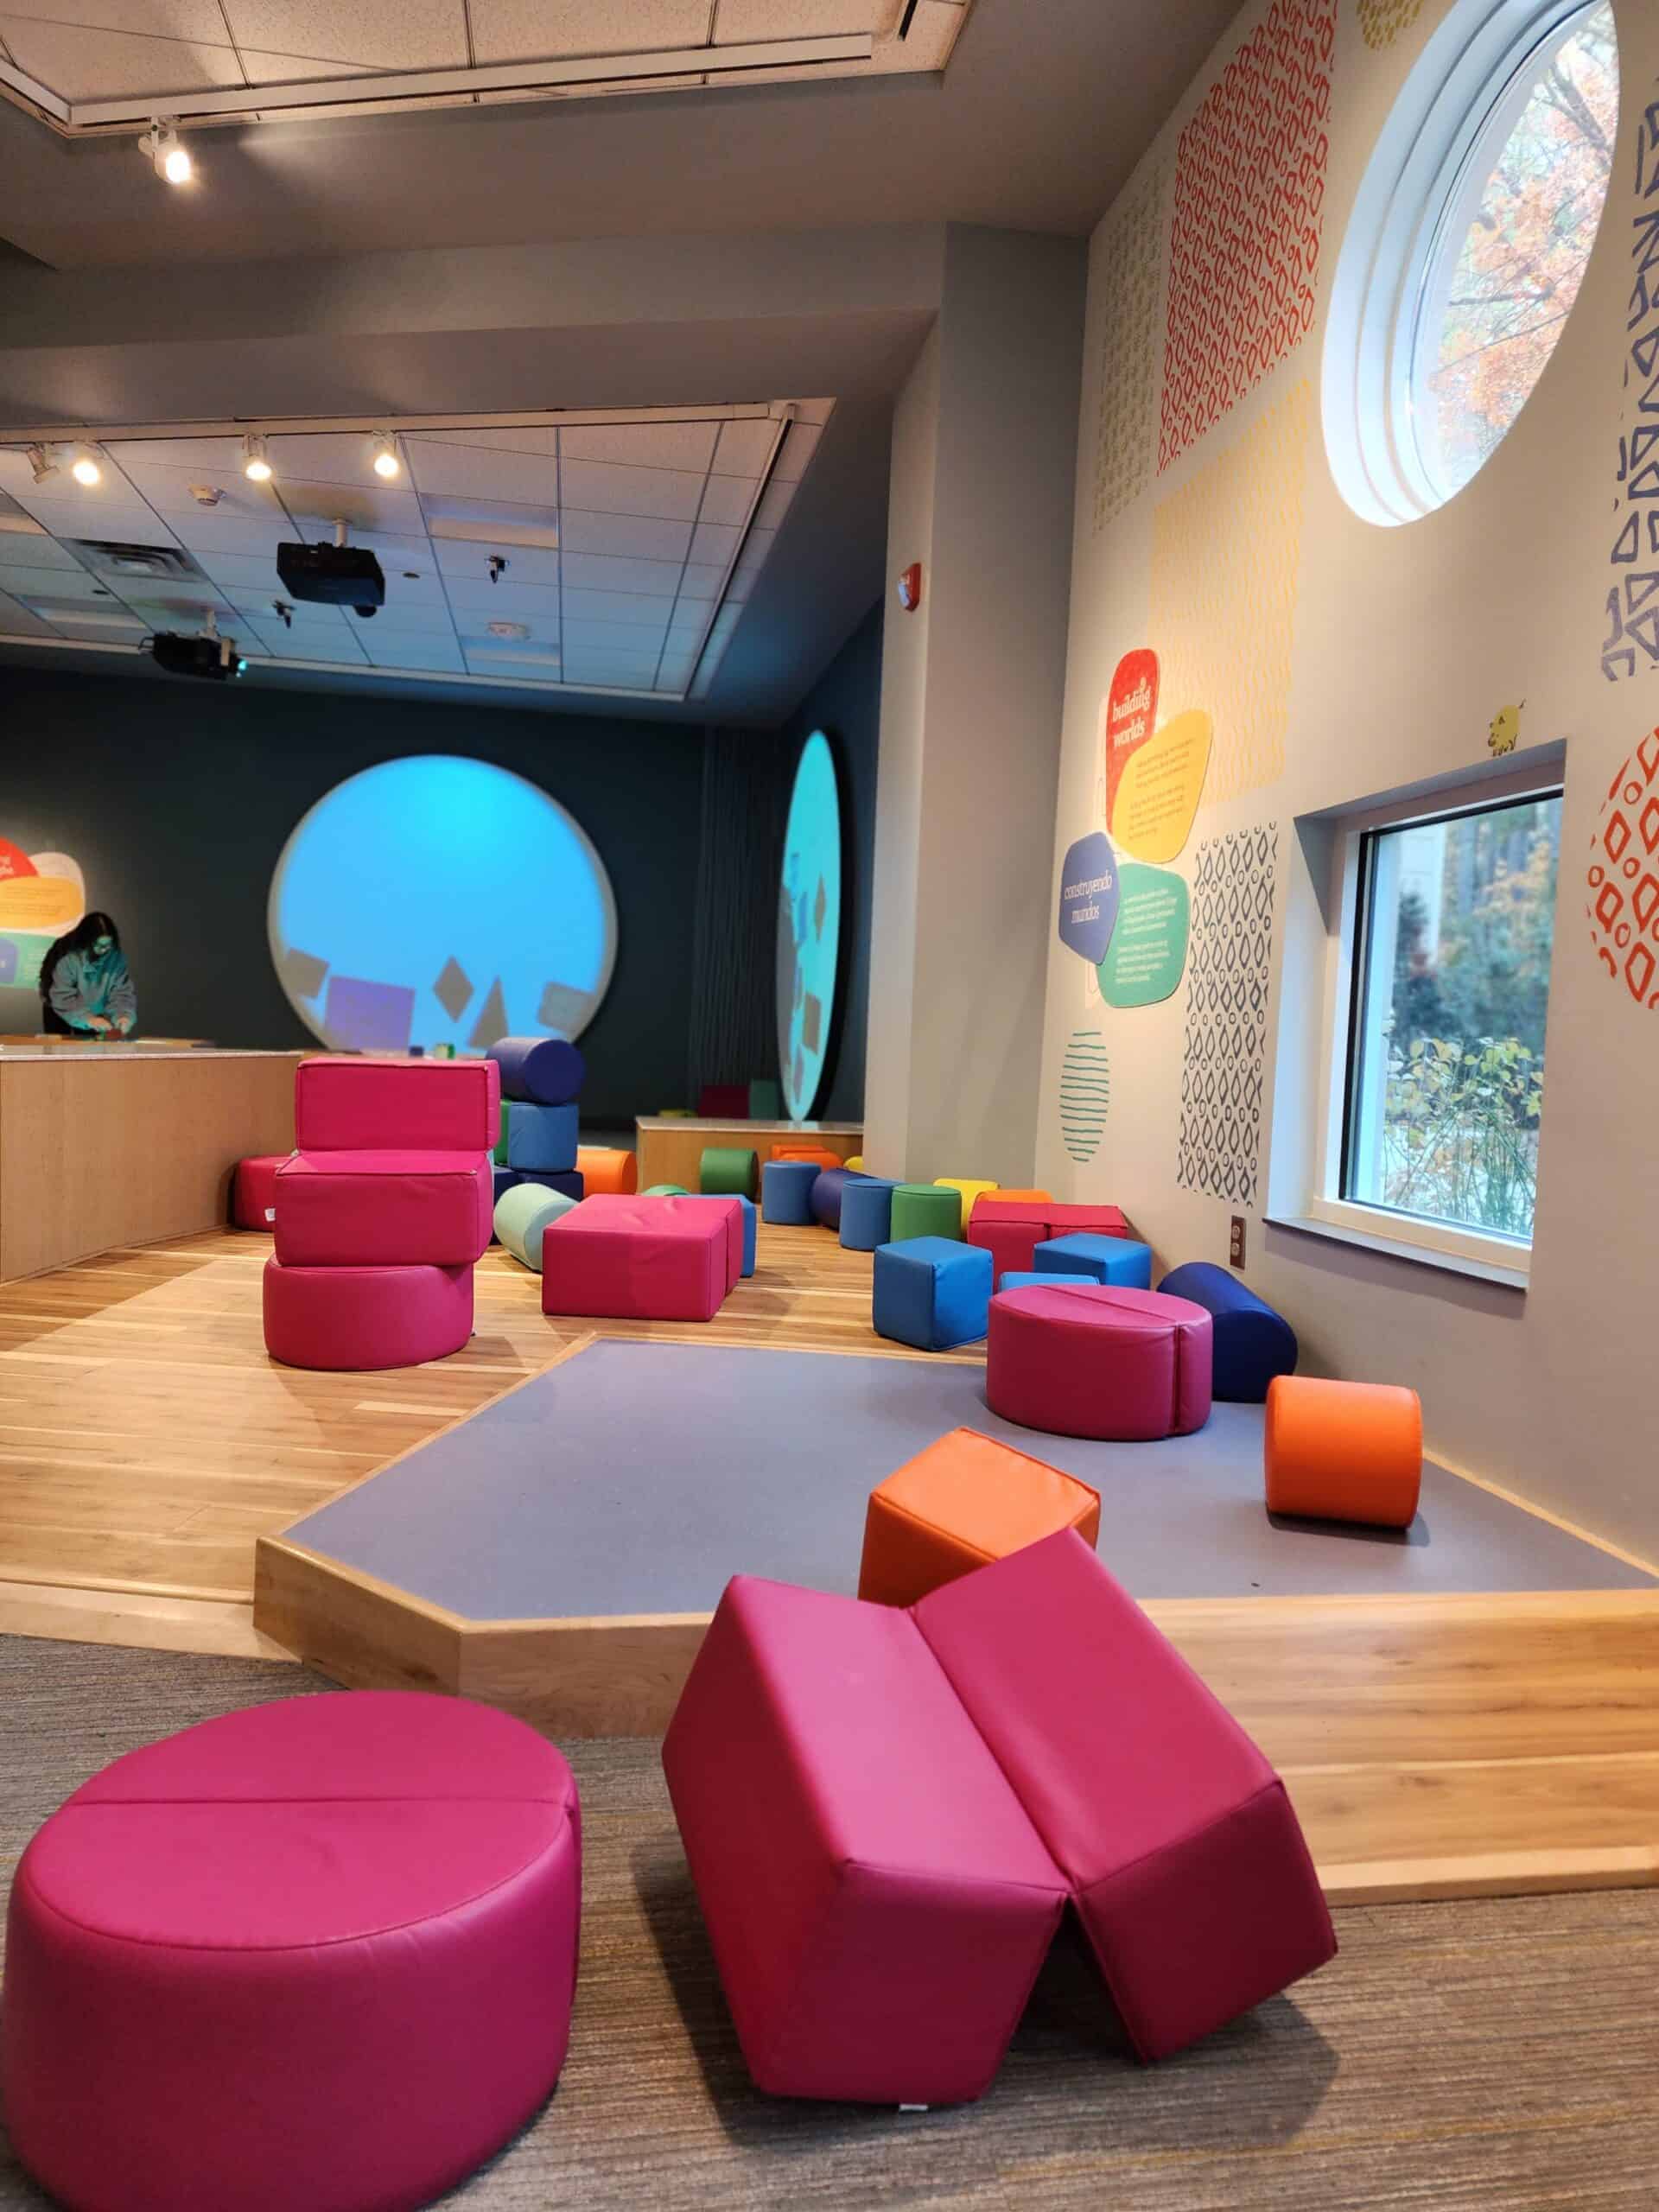 A modern, brightly lit indoor play area featuring an array of colorful soft seating blocks on a wooden floor, with decorative circular windows and playful wall patterns providing an inviting atmosphere for children's activities in Raleigh, NC.